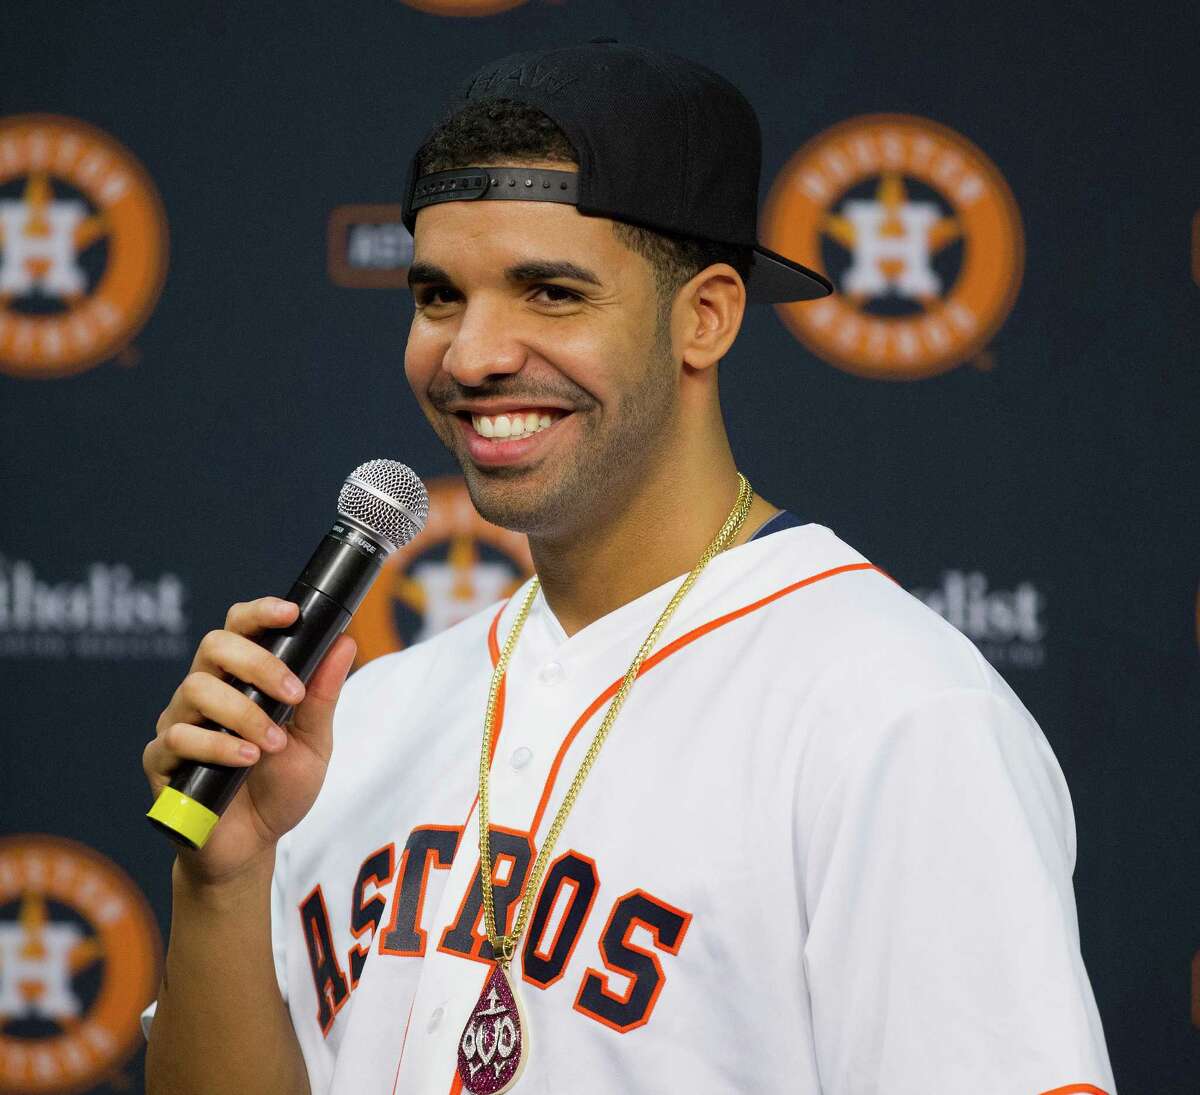 Grammy Award-winning artist Drake has a strong Houston connection. He's hosted a three-day Houston Appreciation Weekend (HAW) event for the past few years.